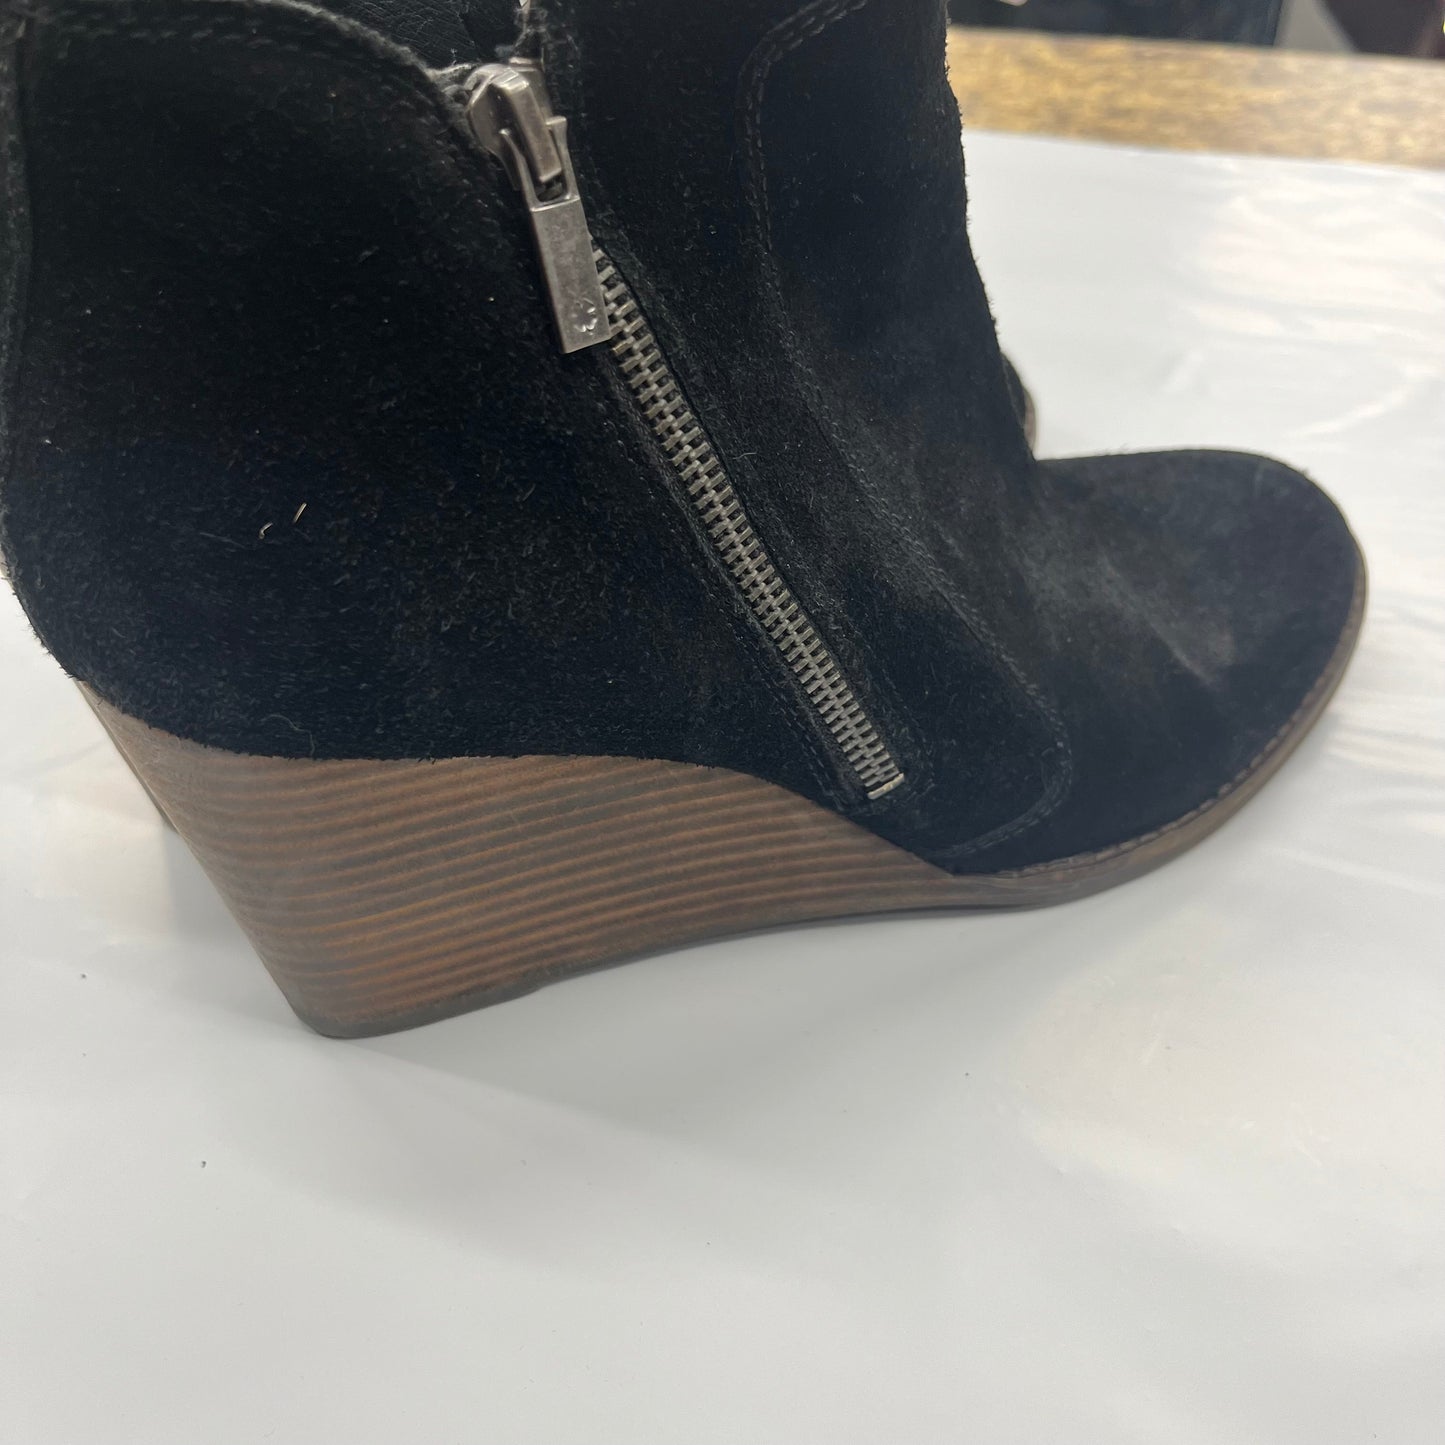 Black Shoes Heels Wedge Lucky Brand, Size 11